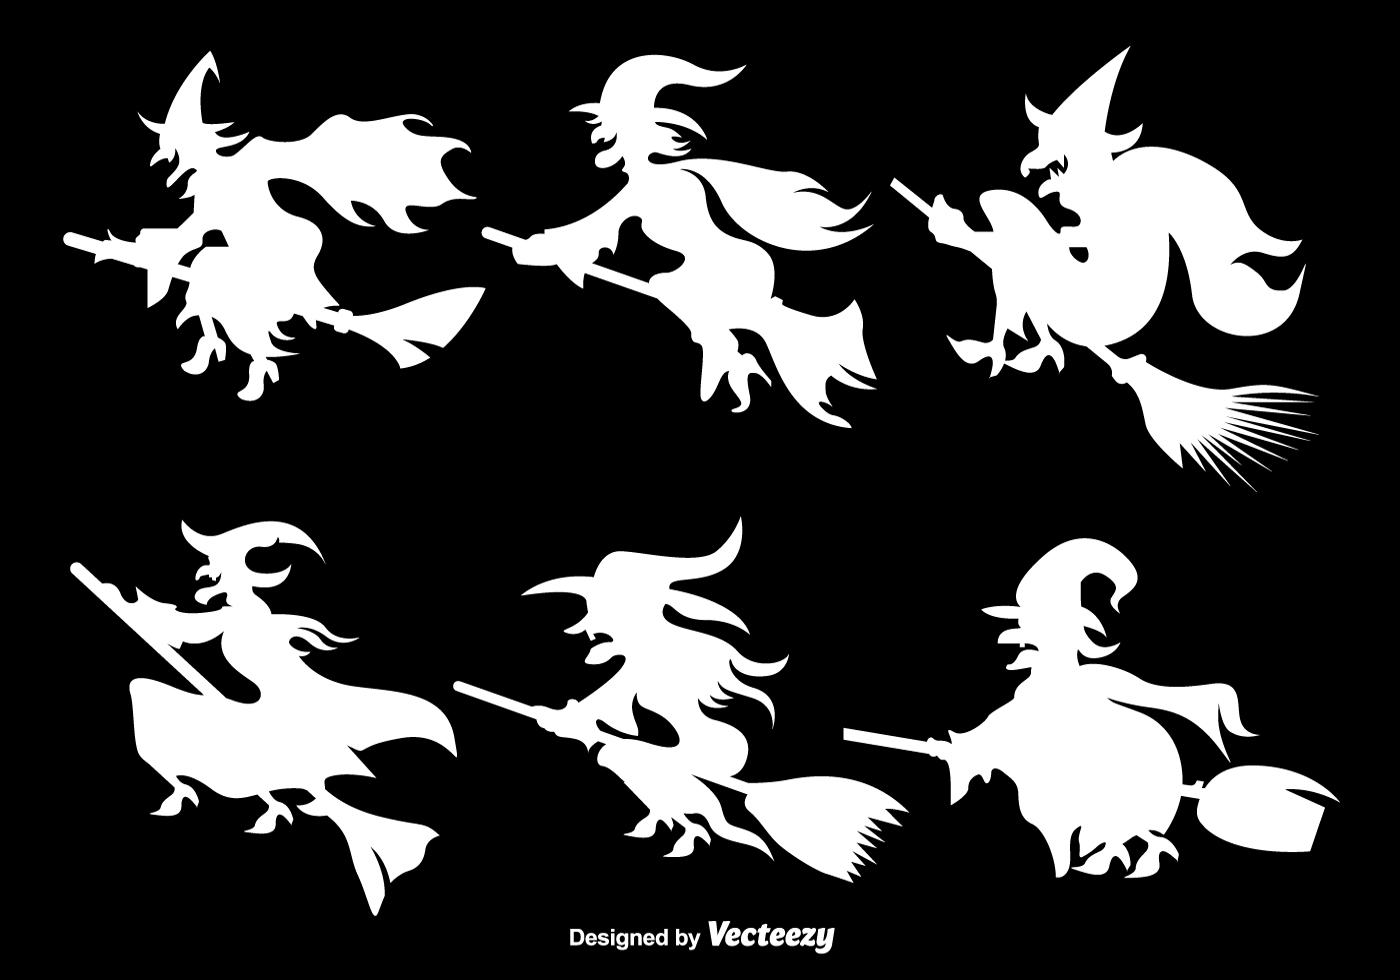 White Witches silhouettes - Download Free Vector Art, Stock Graphics